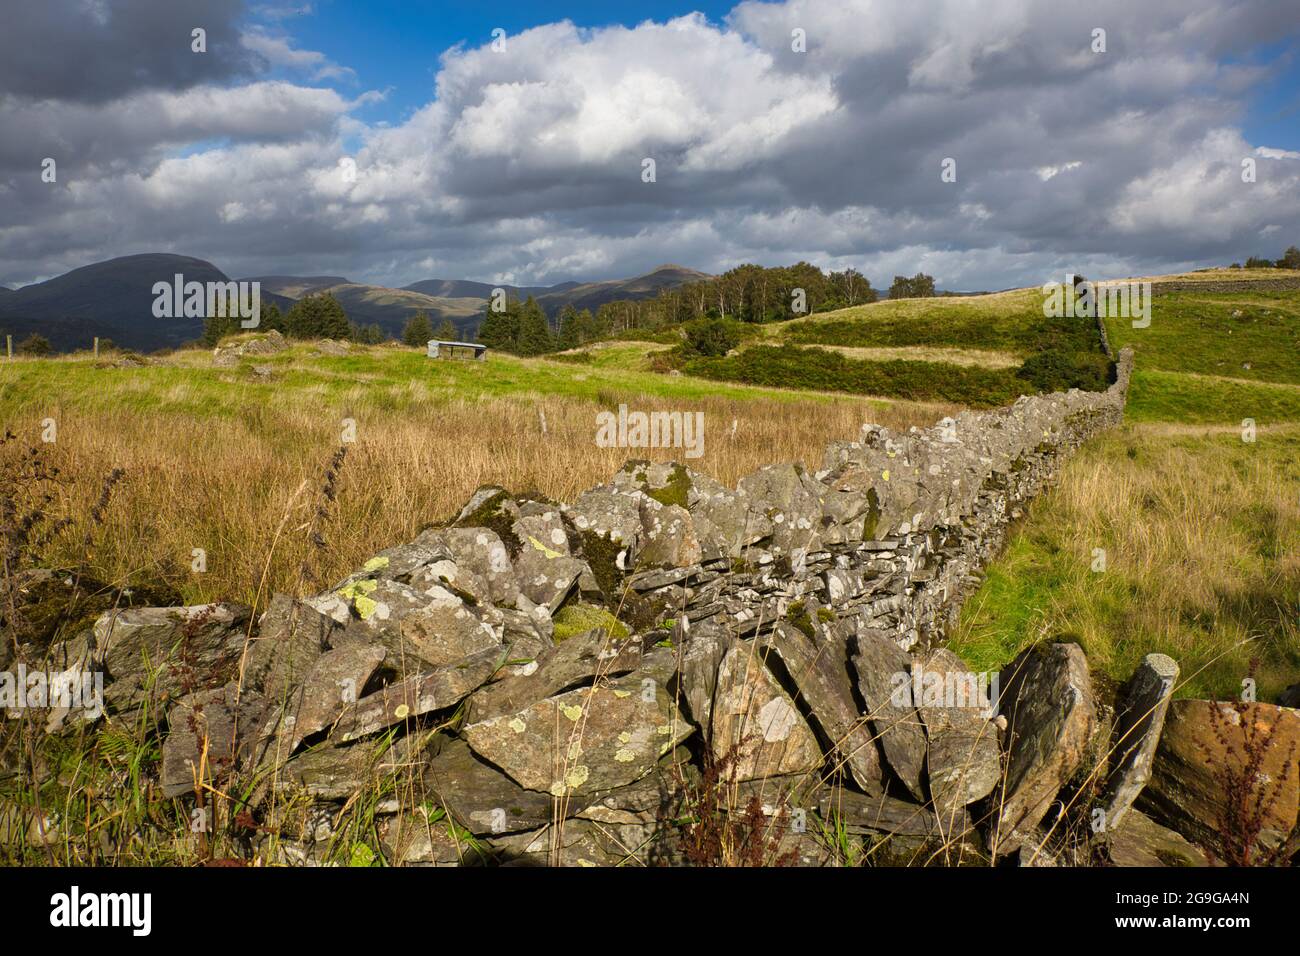 An example of dry stone walling and fields in Cumbria, The Lake District, England, UK Stock Photo